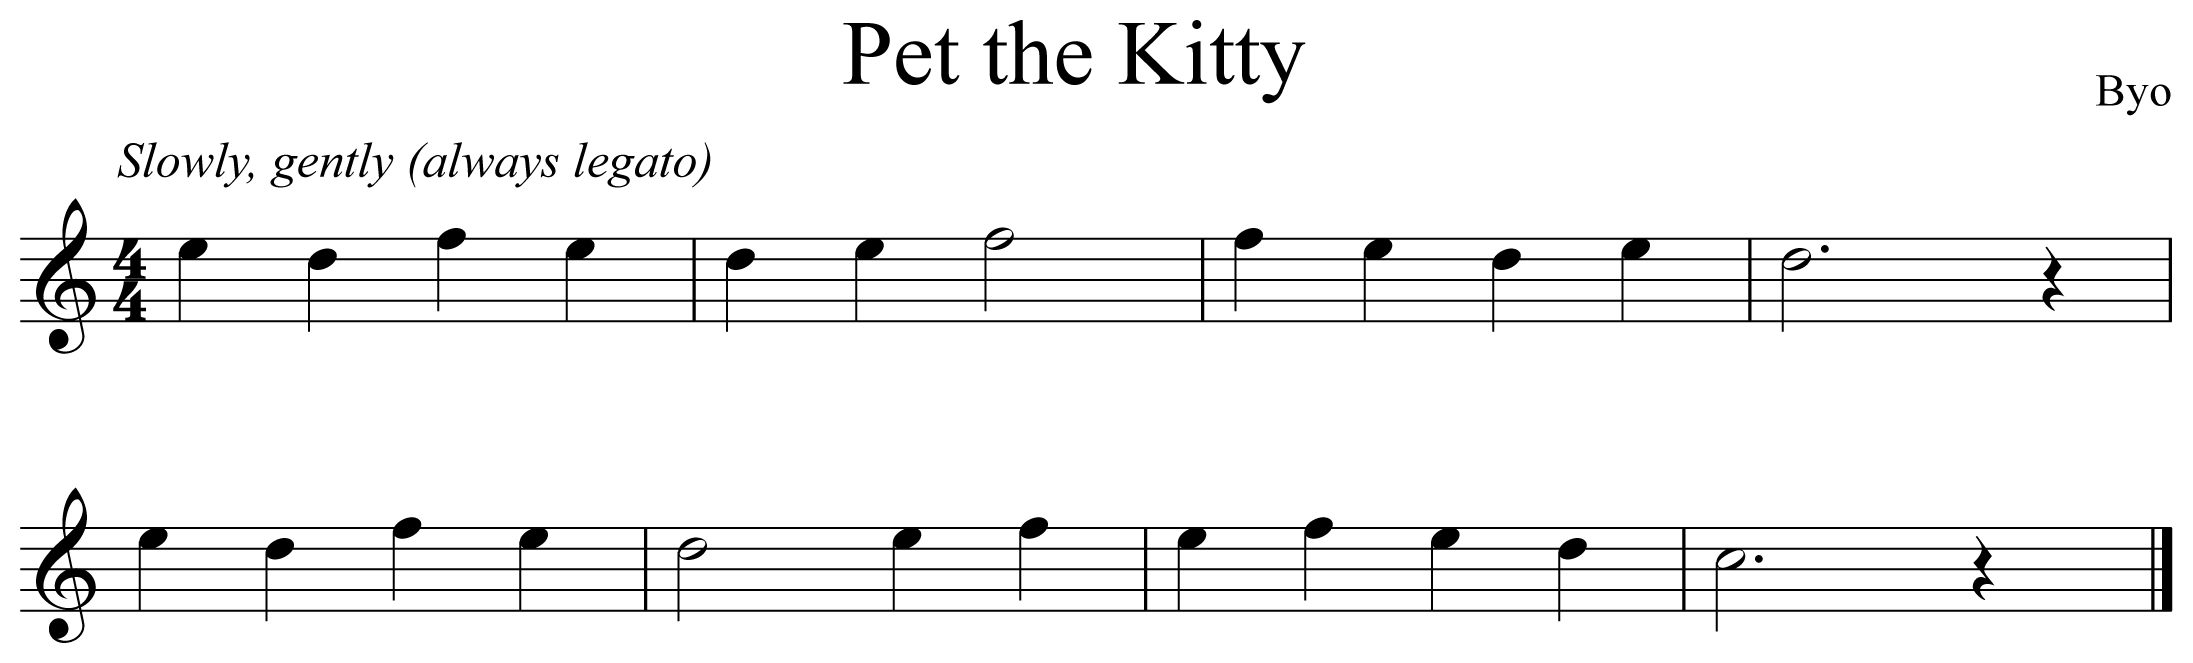 Pet the Kitty Music Notation Saxophone